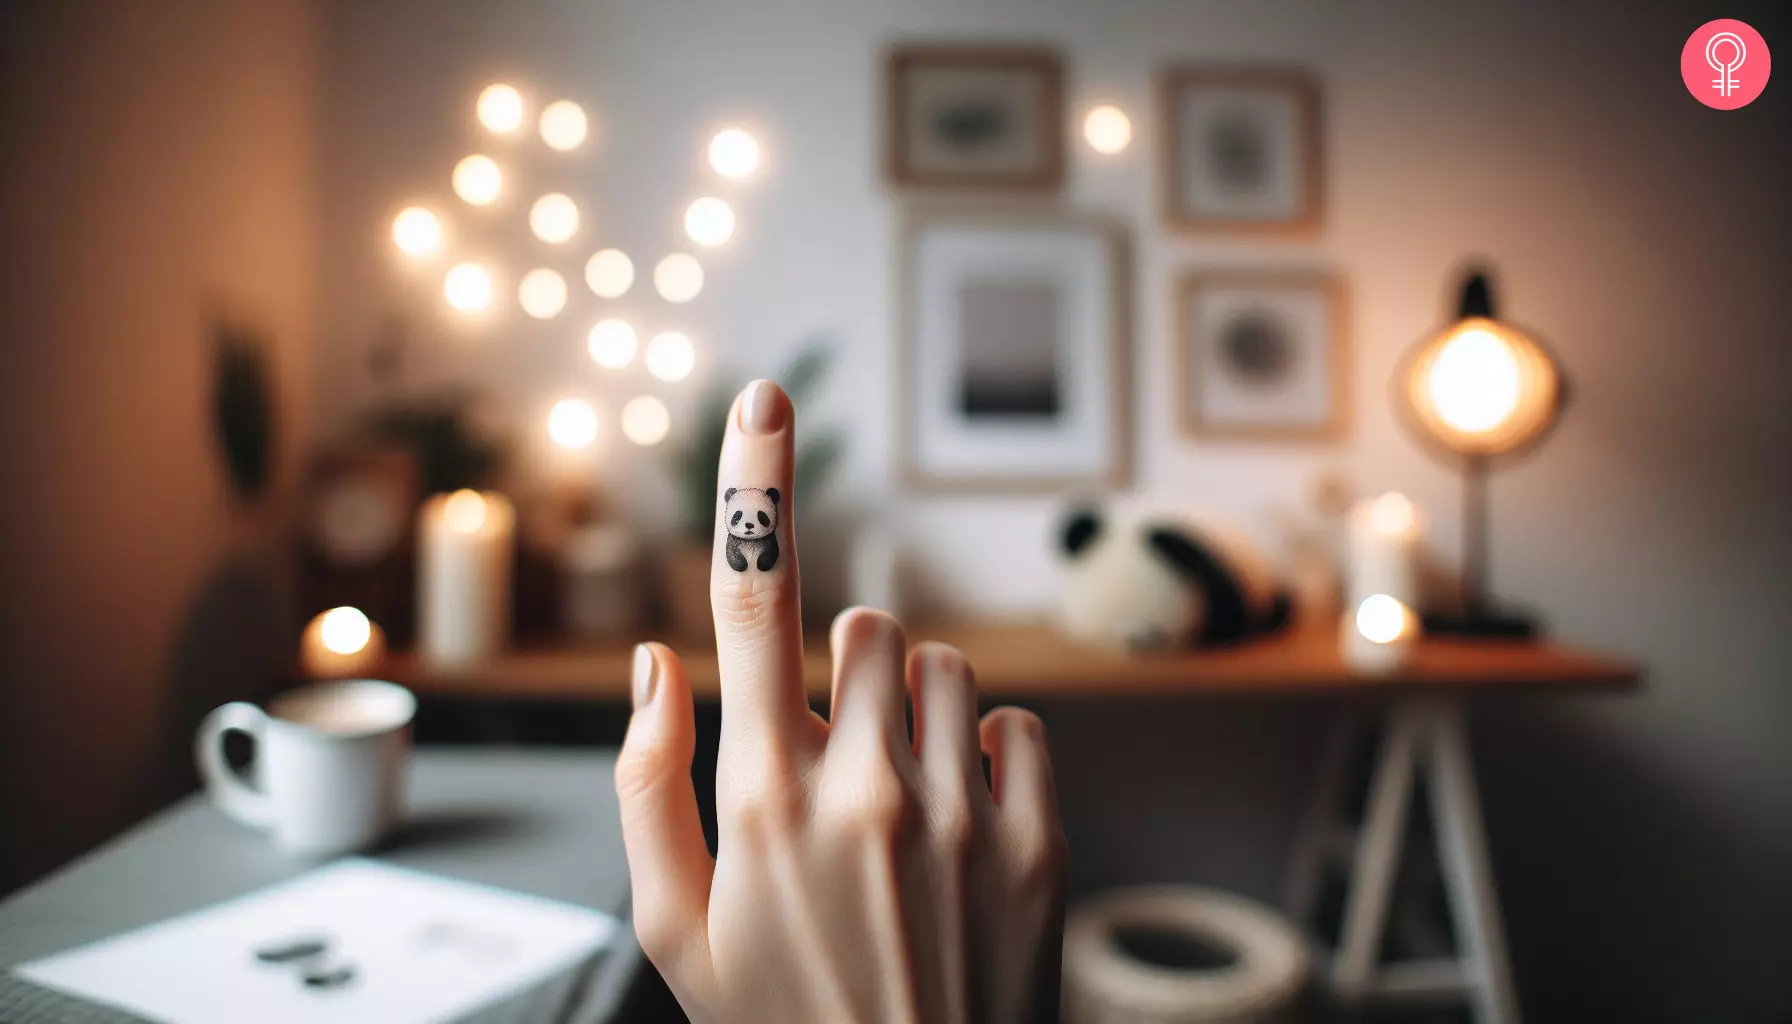 A small panda tattoo on a woman’s index finger